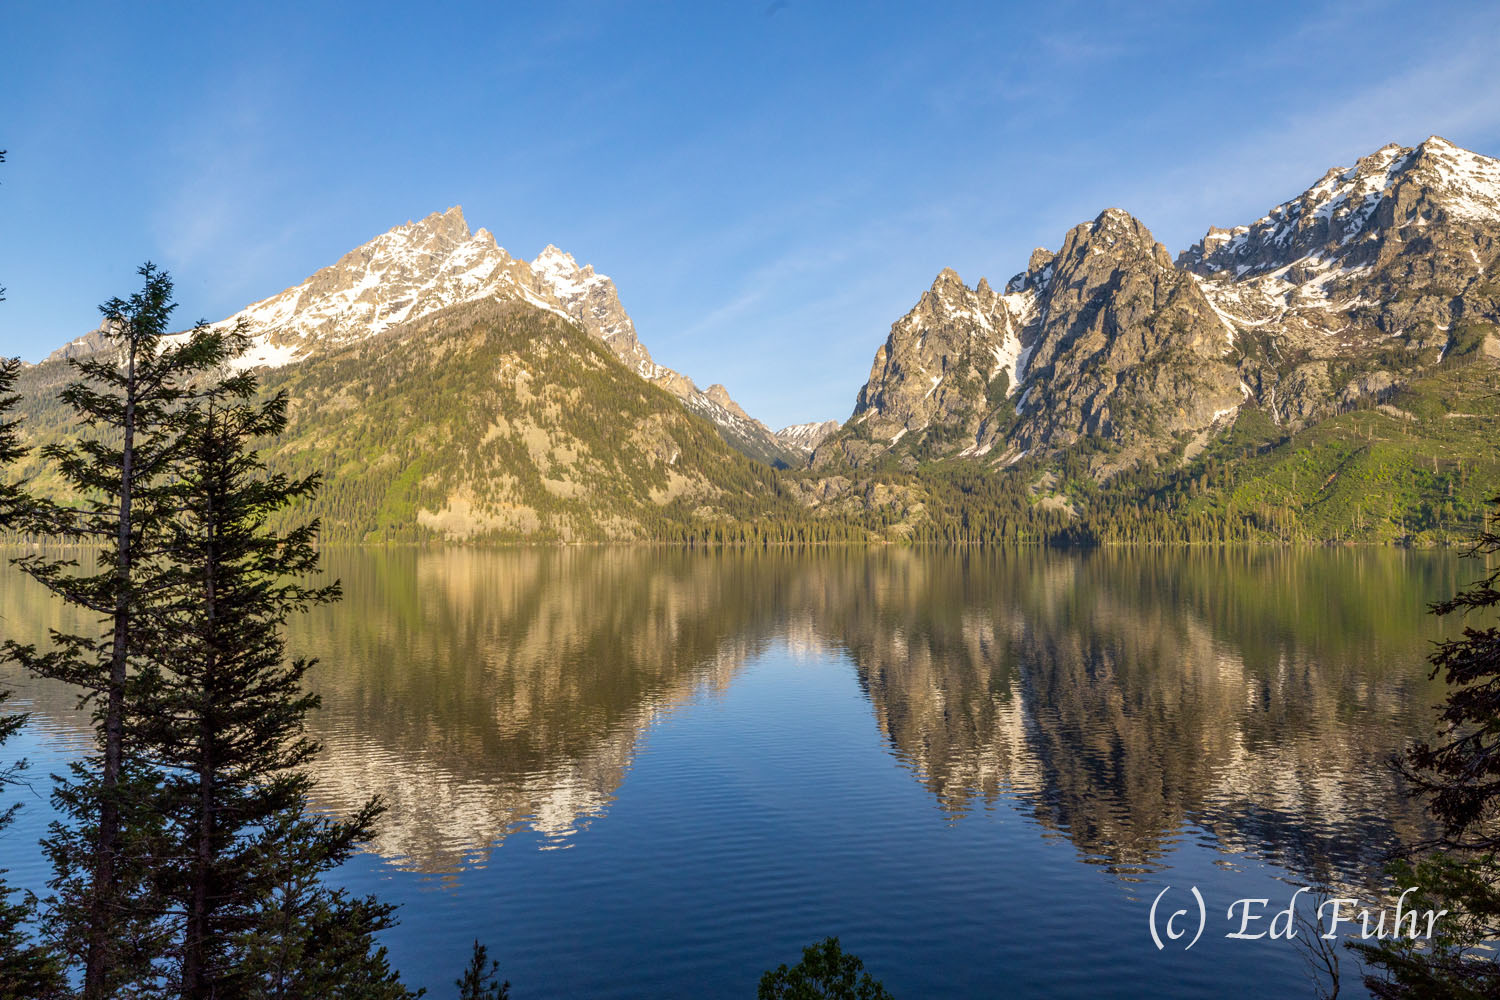 Cascade Canyon and Jenny Lake were formed more than 12,000 years ago when glaciers carved the canyon, creating a moraine that...